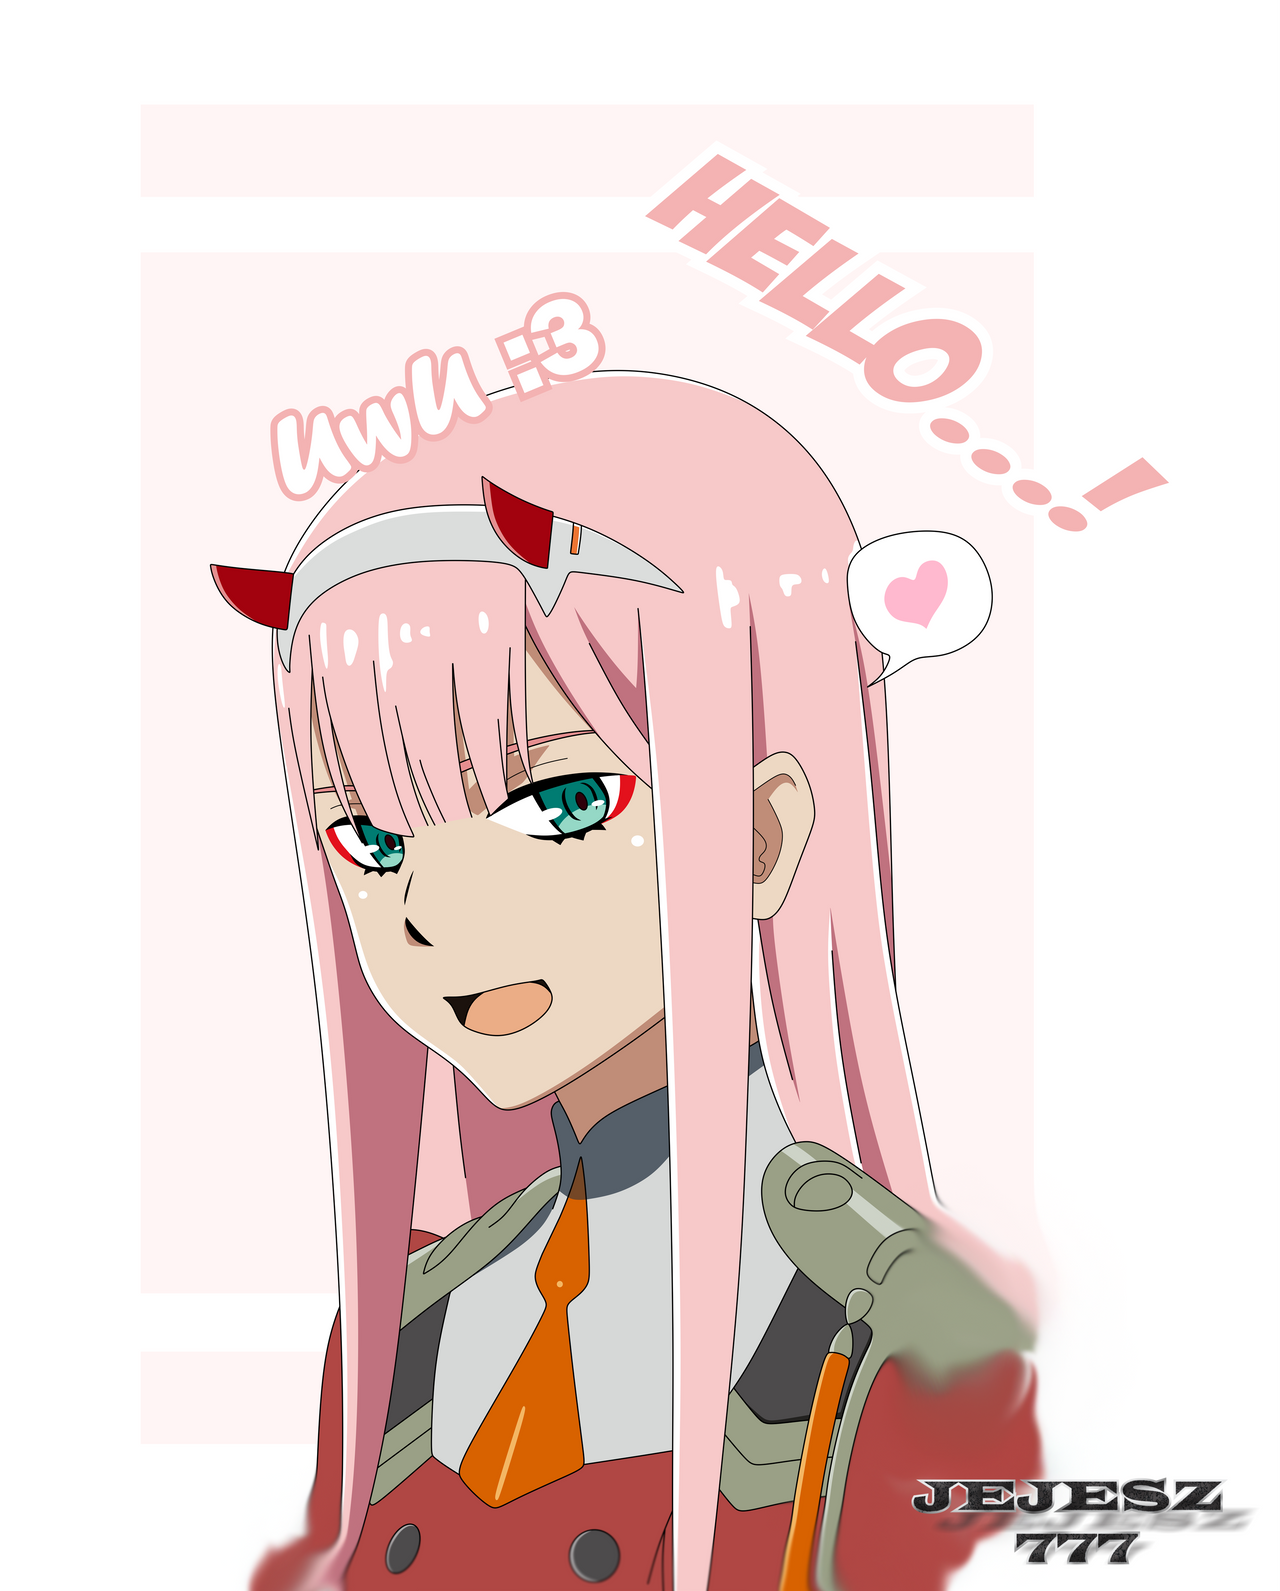 Anime Darling in the Franxx] - Zero Two Version 3 by D-G-L-X on DeviantArt